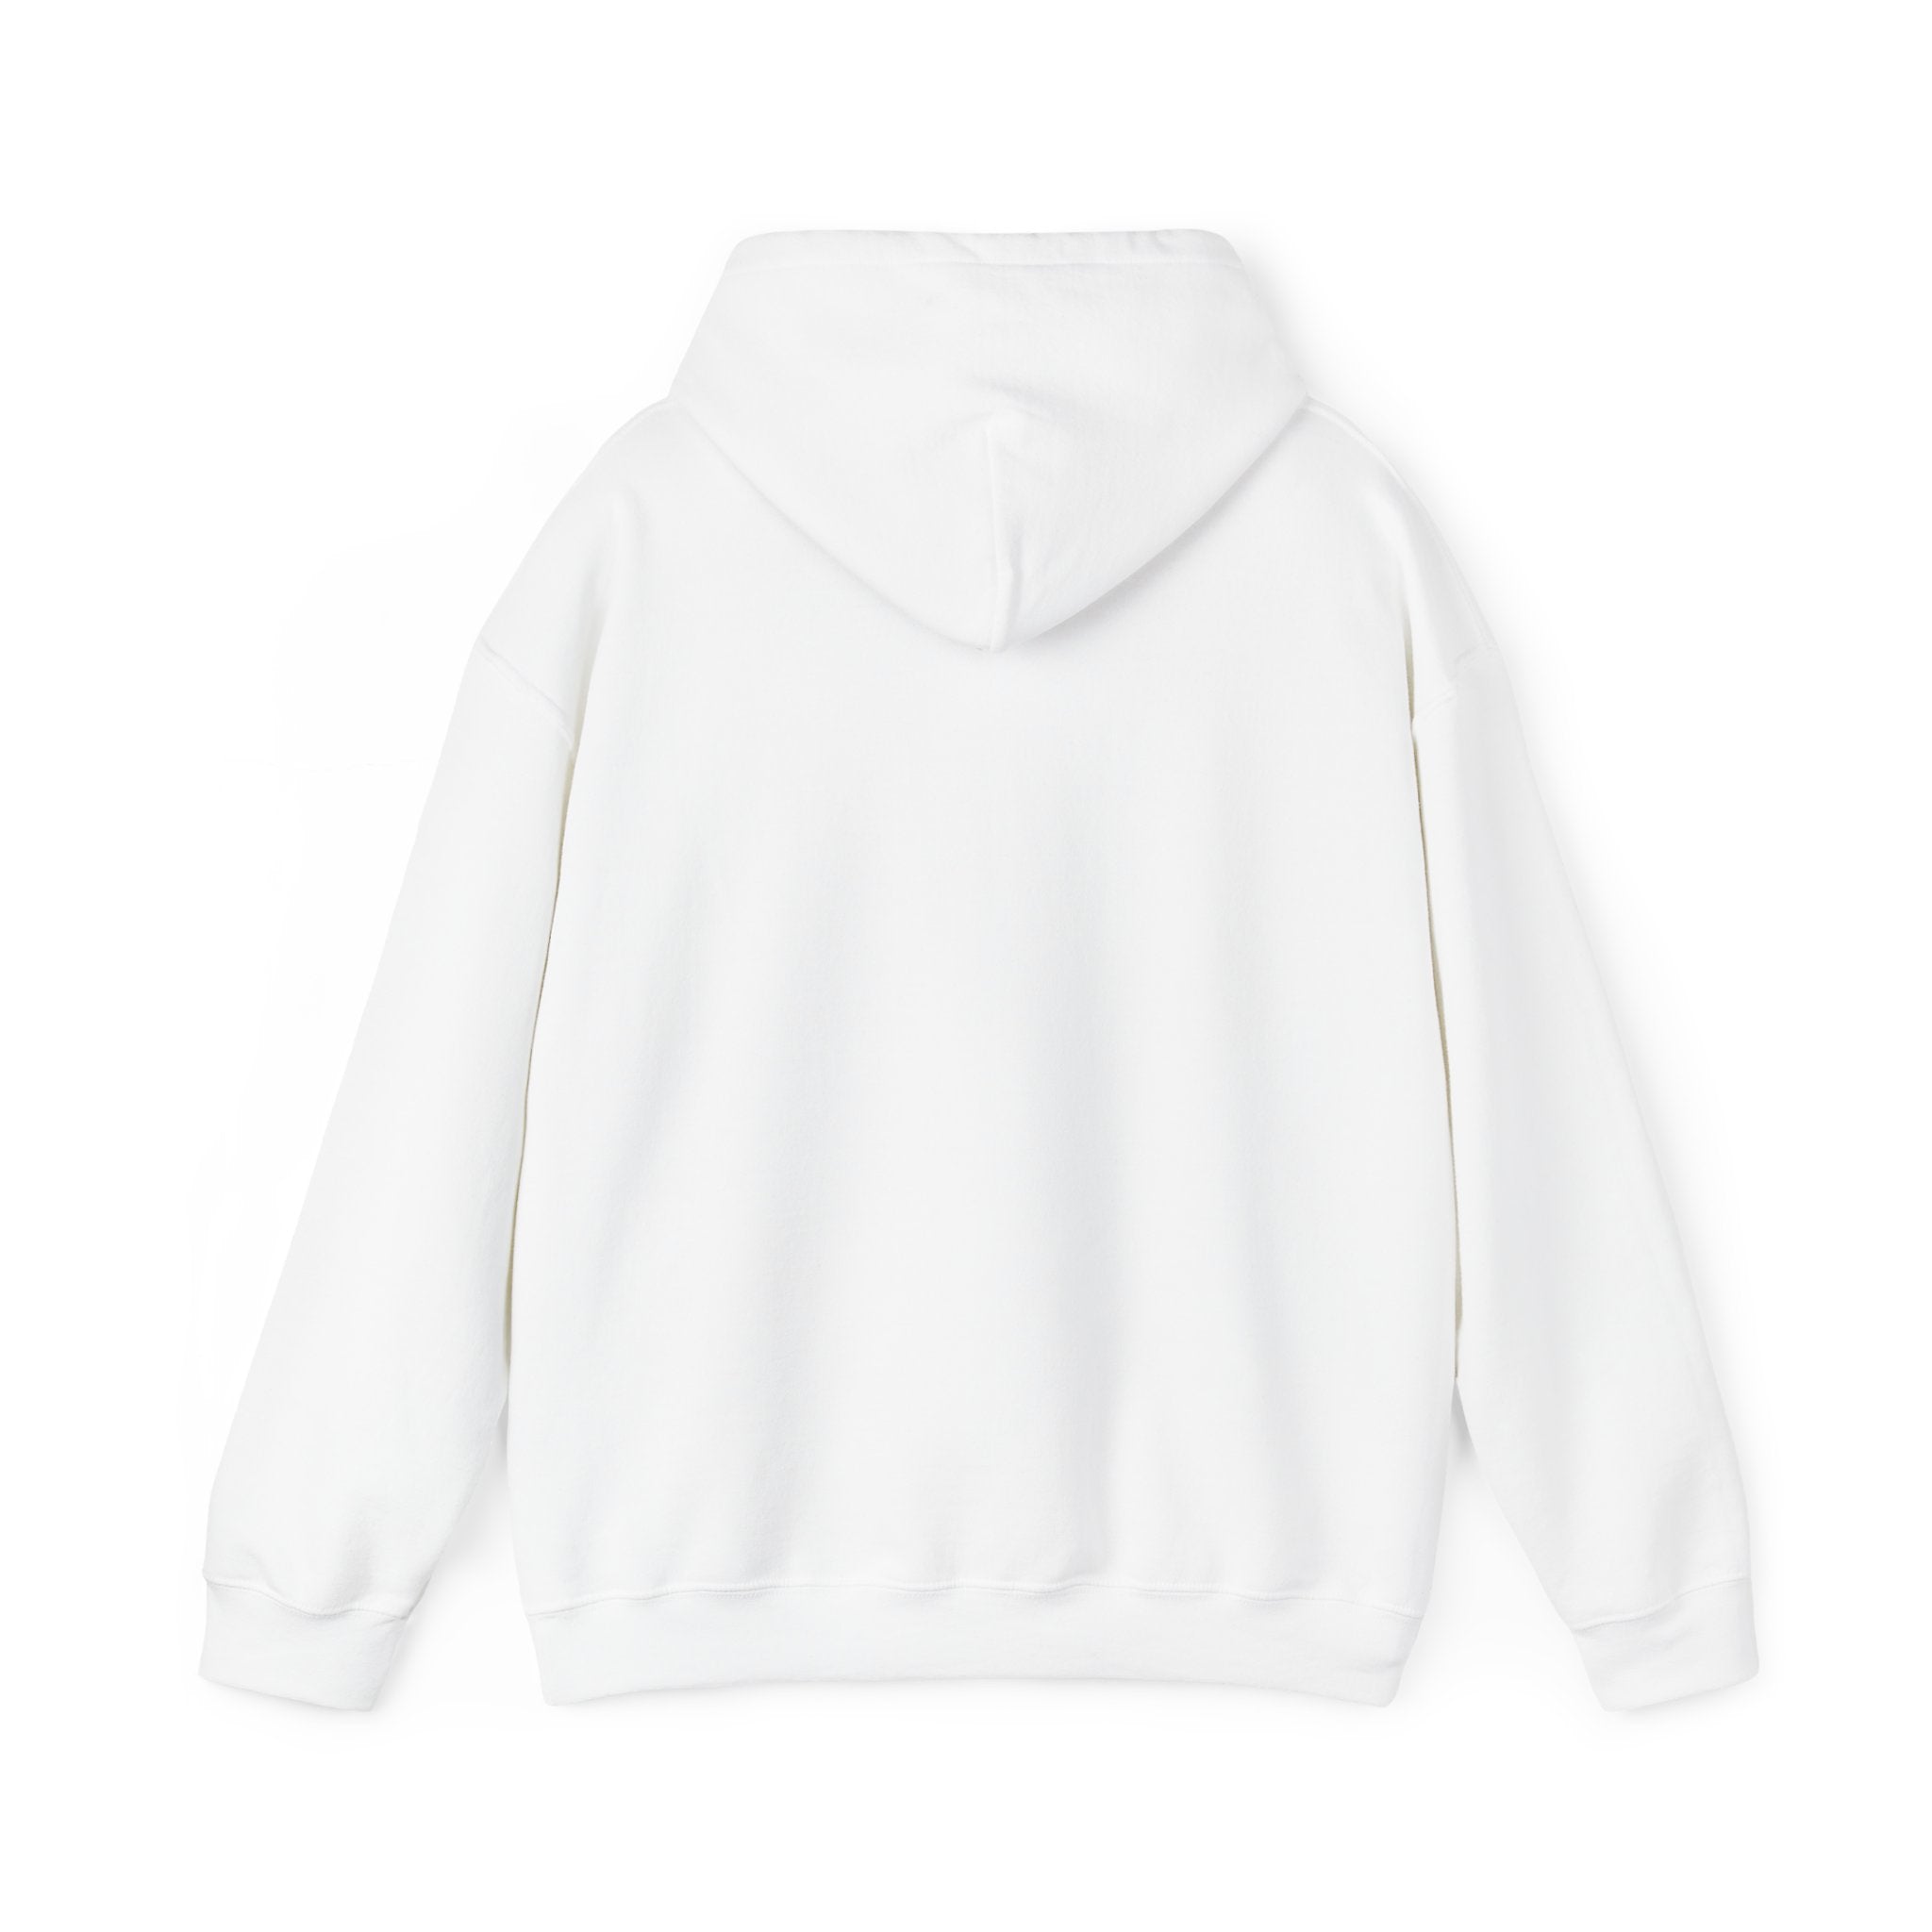 A stylish plain white Si-S Light Pendant - Hooded Sweatshirt is displayed on a white background. The hoodie, viewed from the back, showcases the hood and long sleeves, providing a clean and modern look.